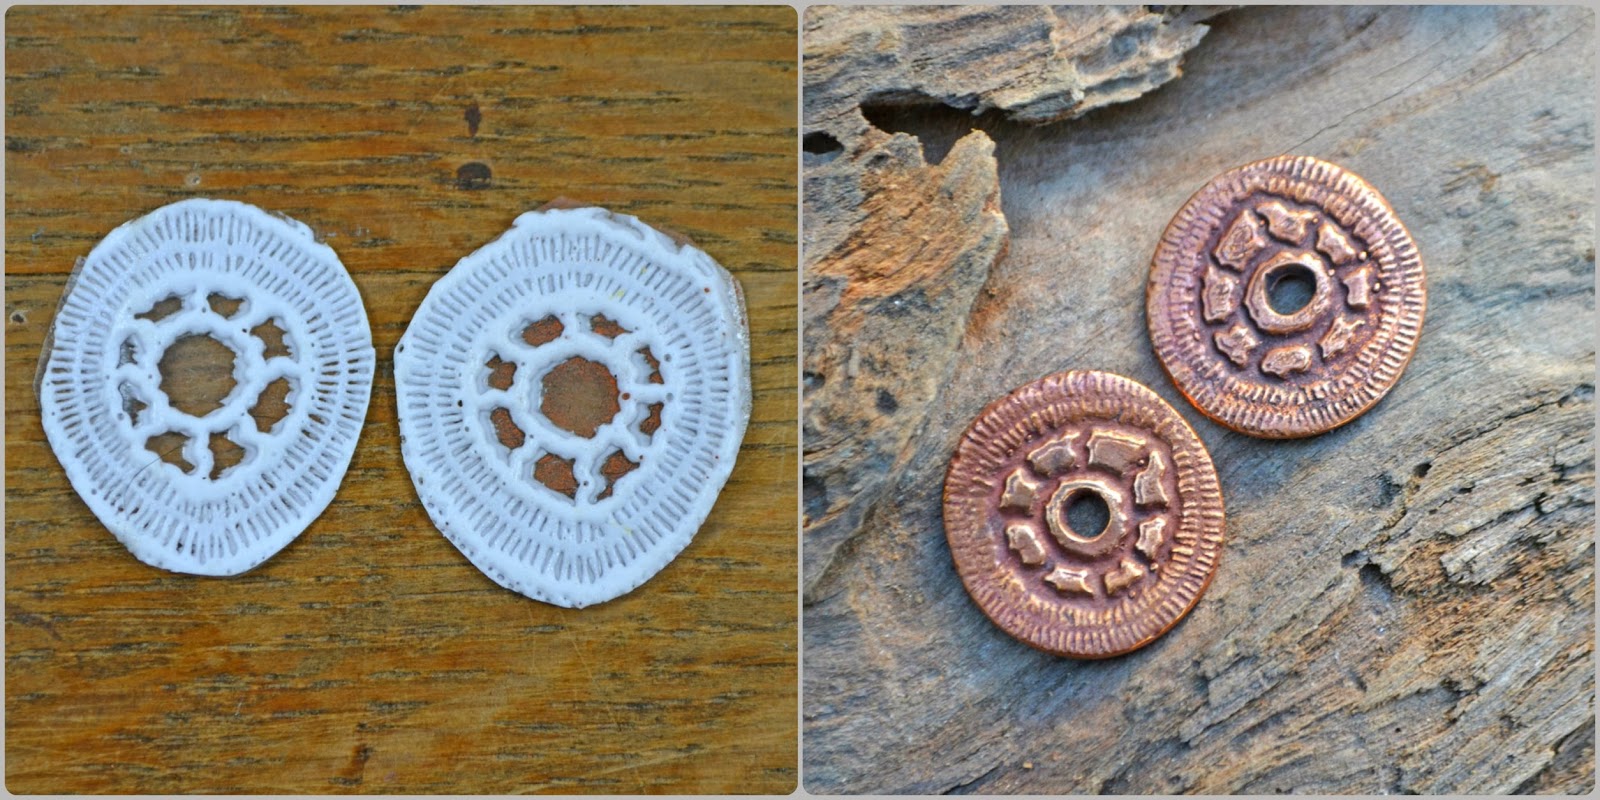 https://www.etsy.com/listing/177087073/copper-wagon-wheel-discs-1-pair-for?ref=shop_home_active_14